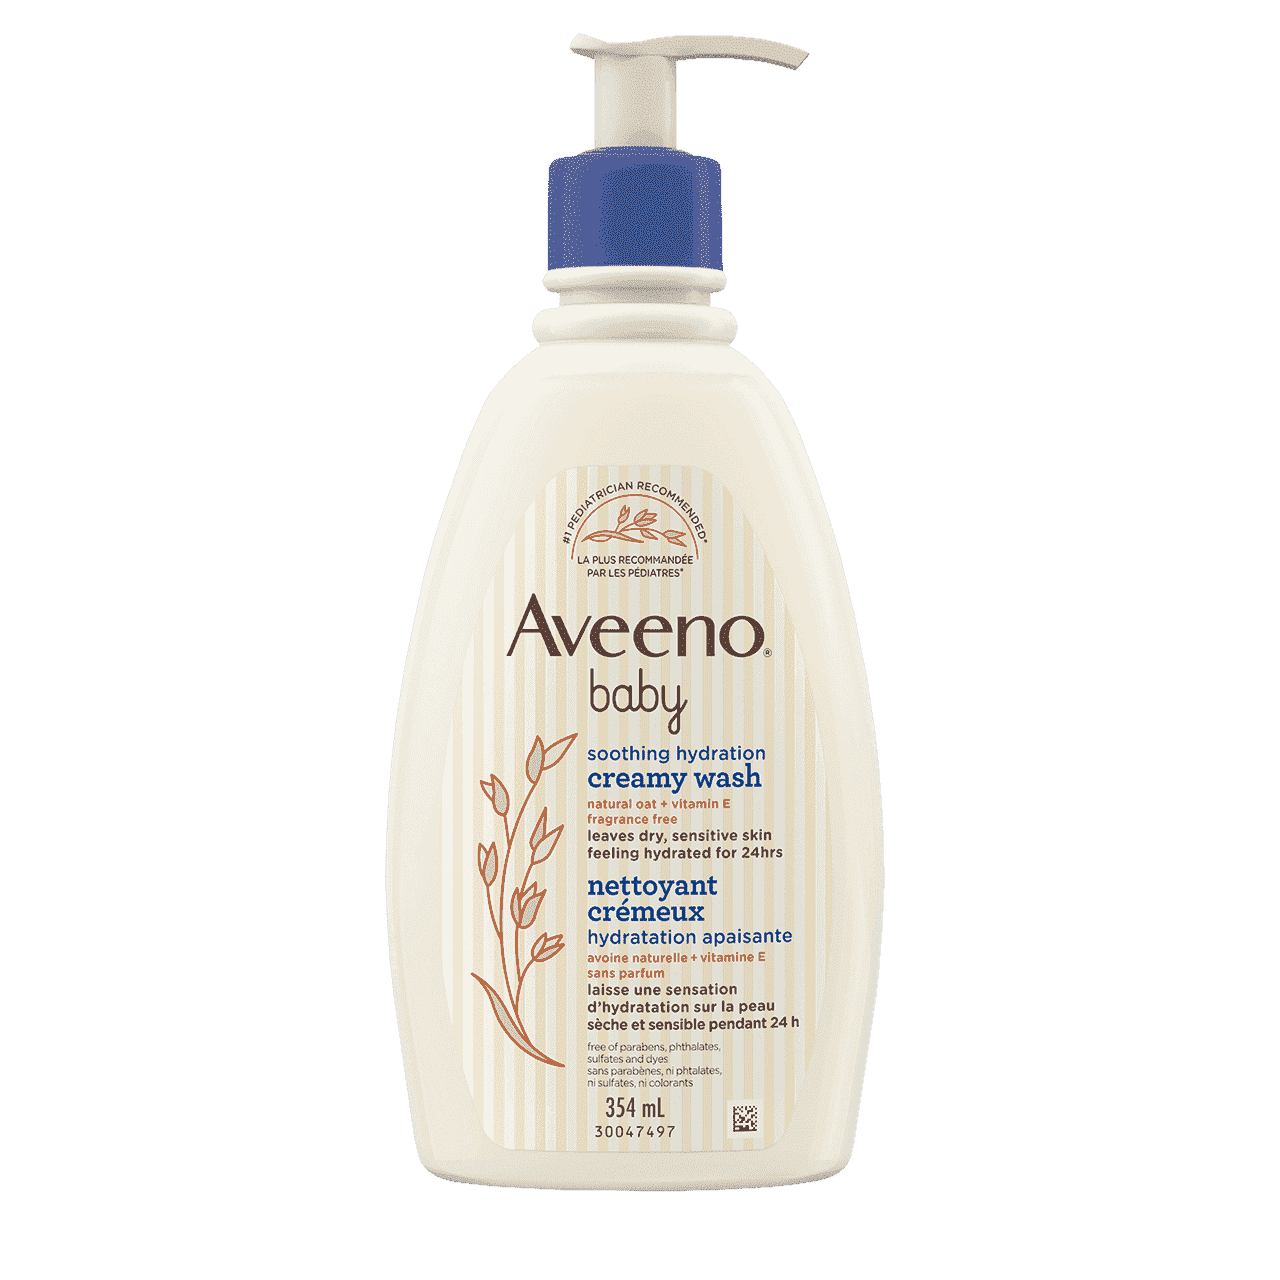 354ml bottle of Aveeno Baby Soothing Hydration